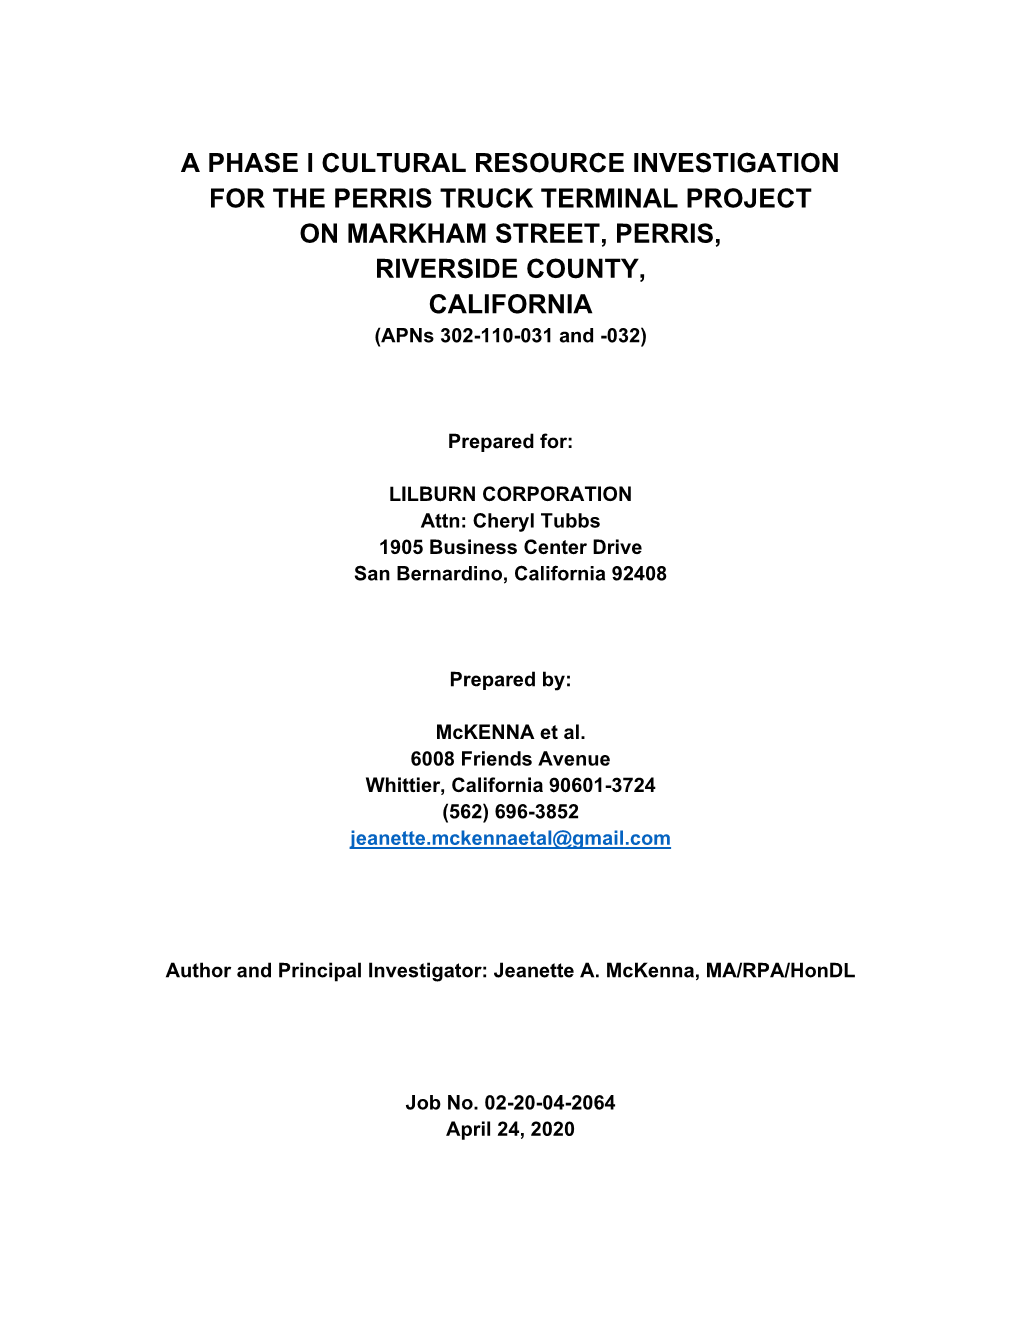 A PHASE I CULTURAL RESOURCE INVESTIGATION for the PERRIS TRUCK TERMINAL PROJECT on MARKHAM STREET, PERRIS, RIVERSIDE COUNTY, CALIFORNIA (Apns 302-110-031 and -032)